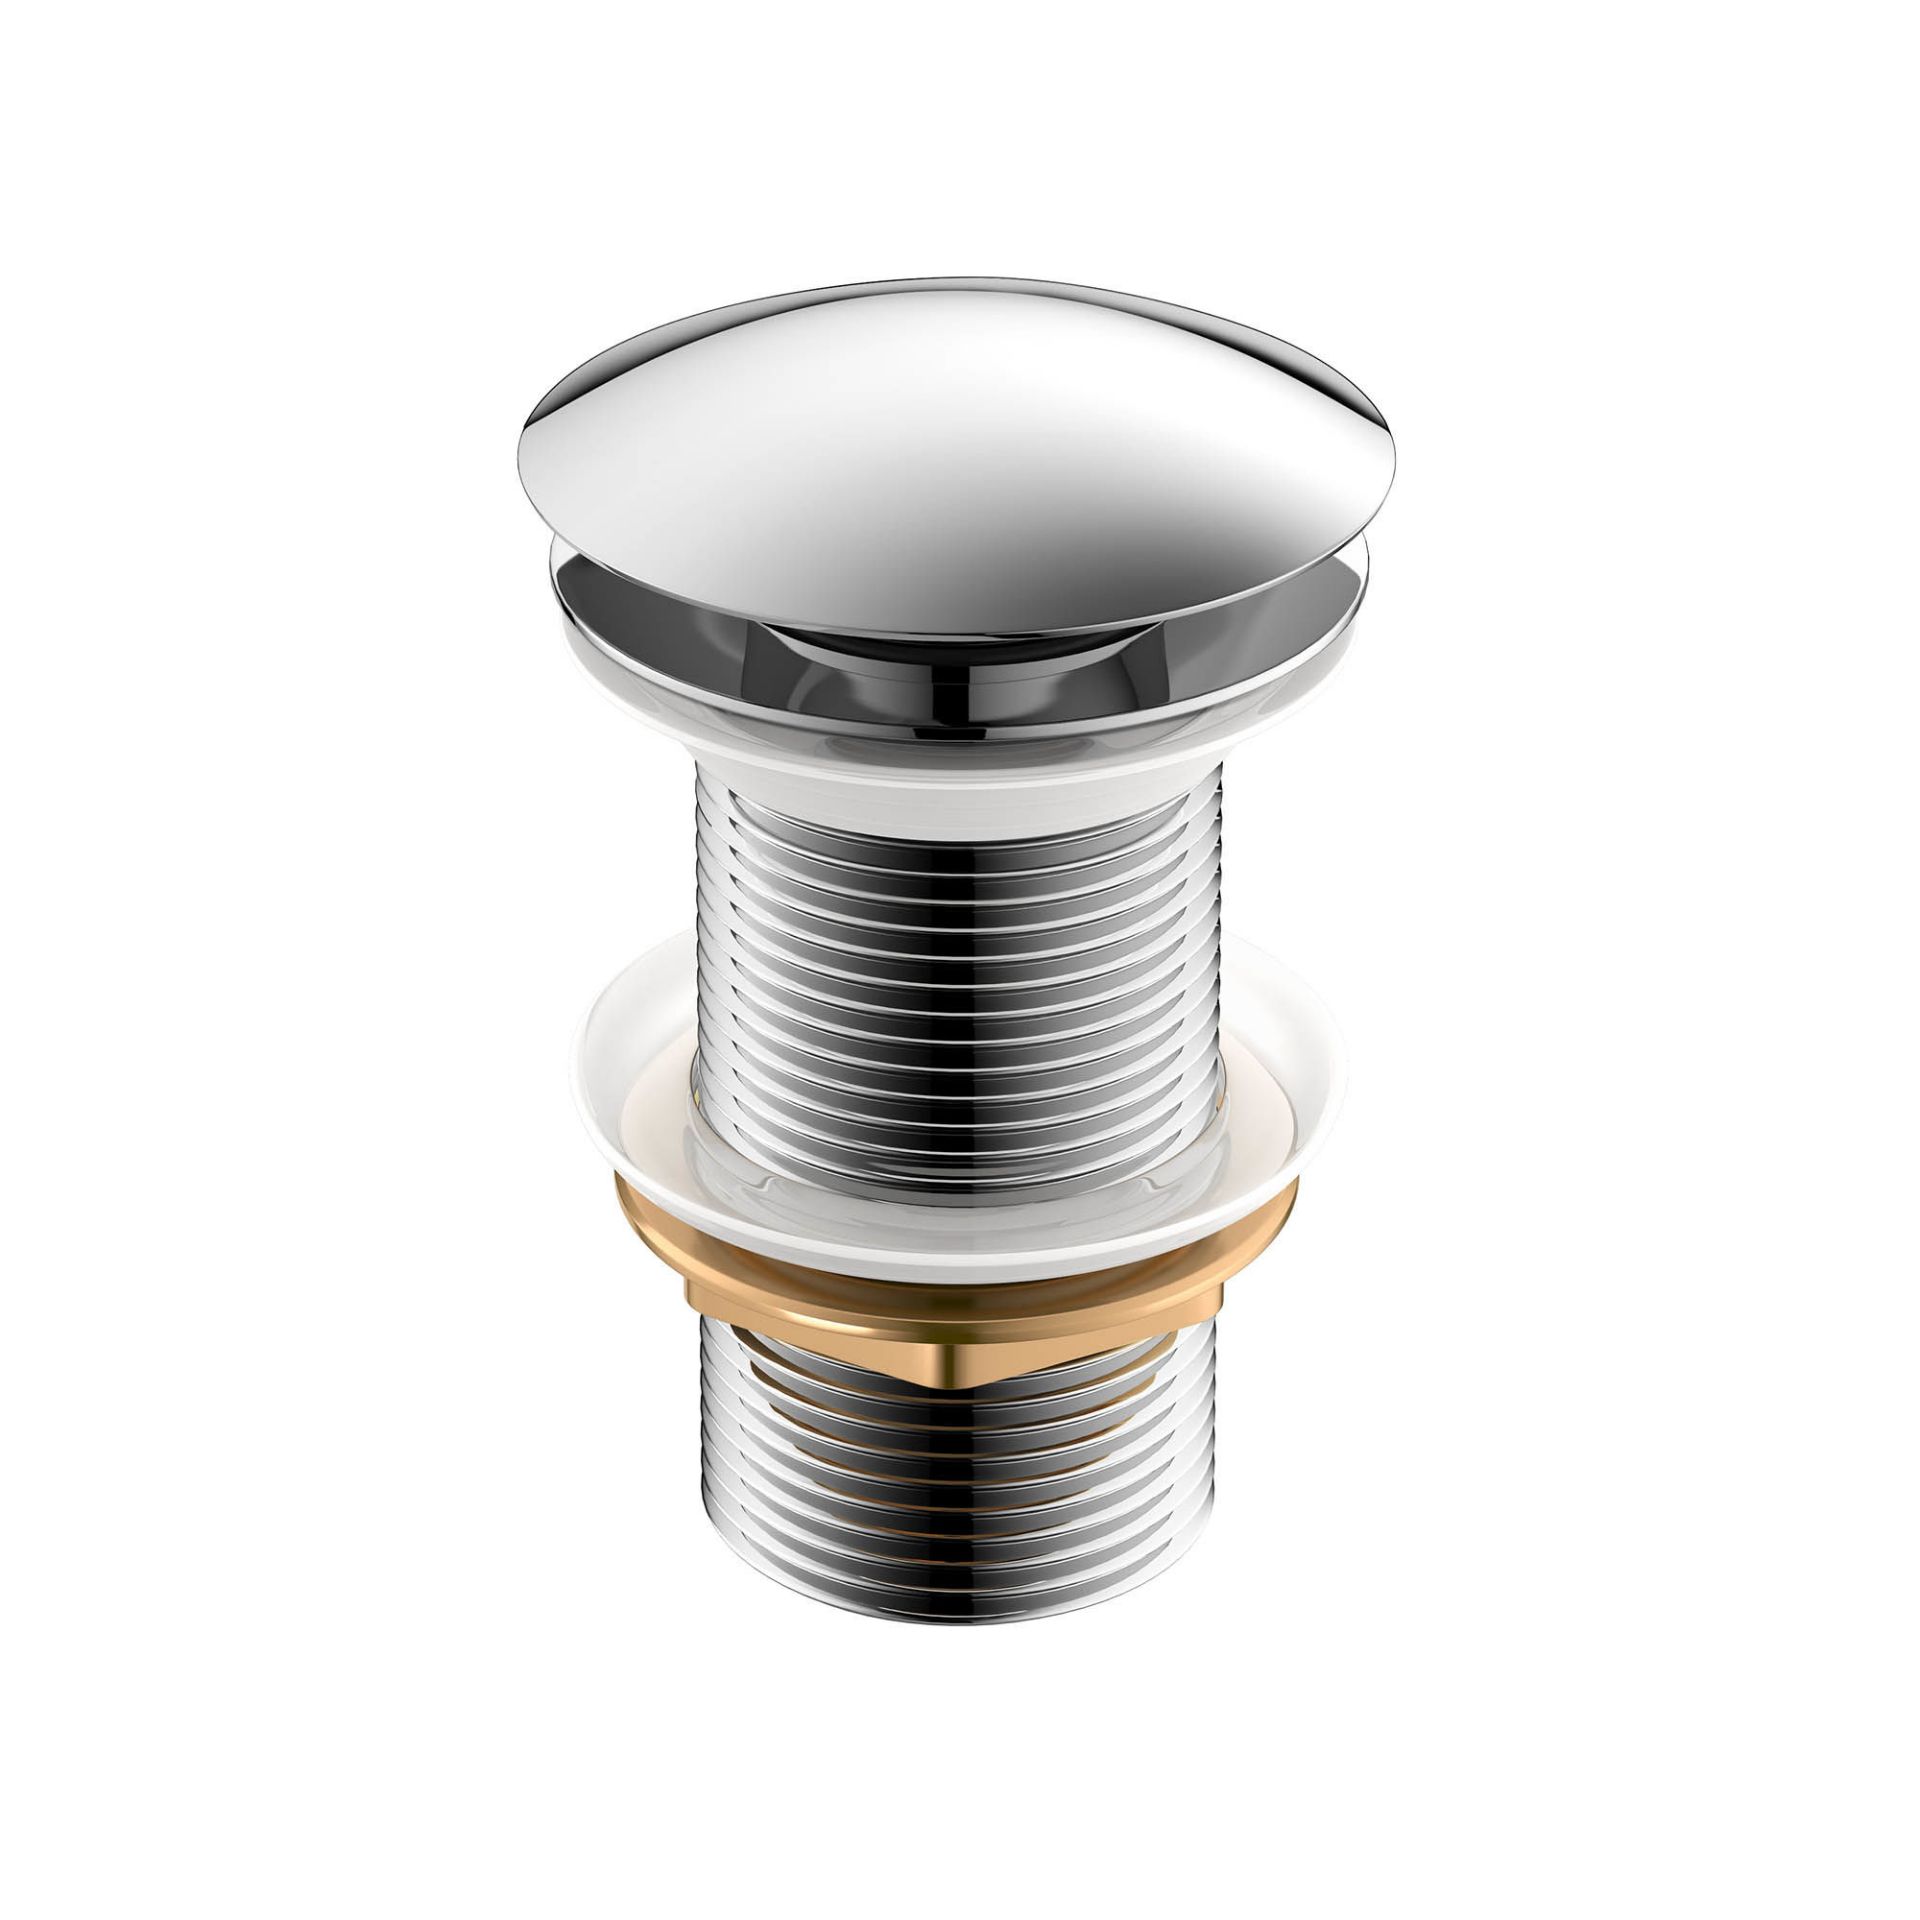 (SU1006) Basin Waste - Unslotted Push Button Pop-Up Made with zinc with solid brass components...